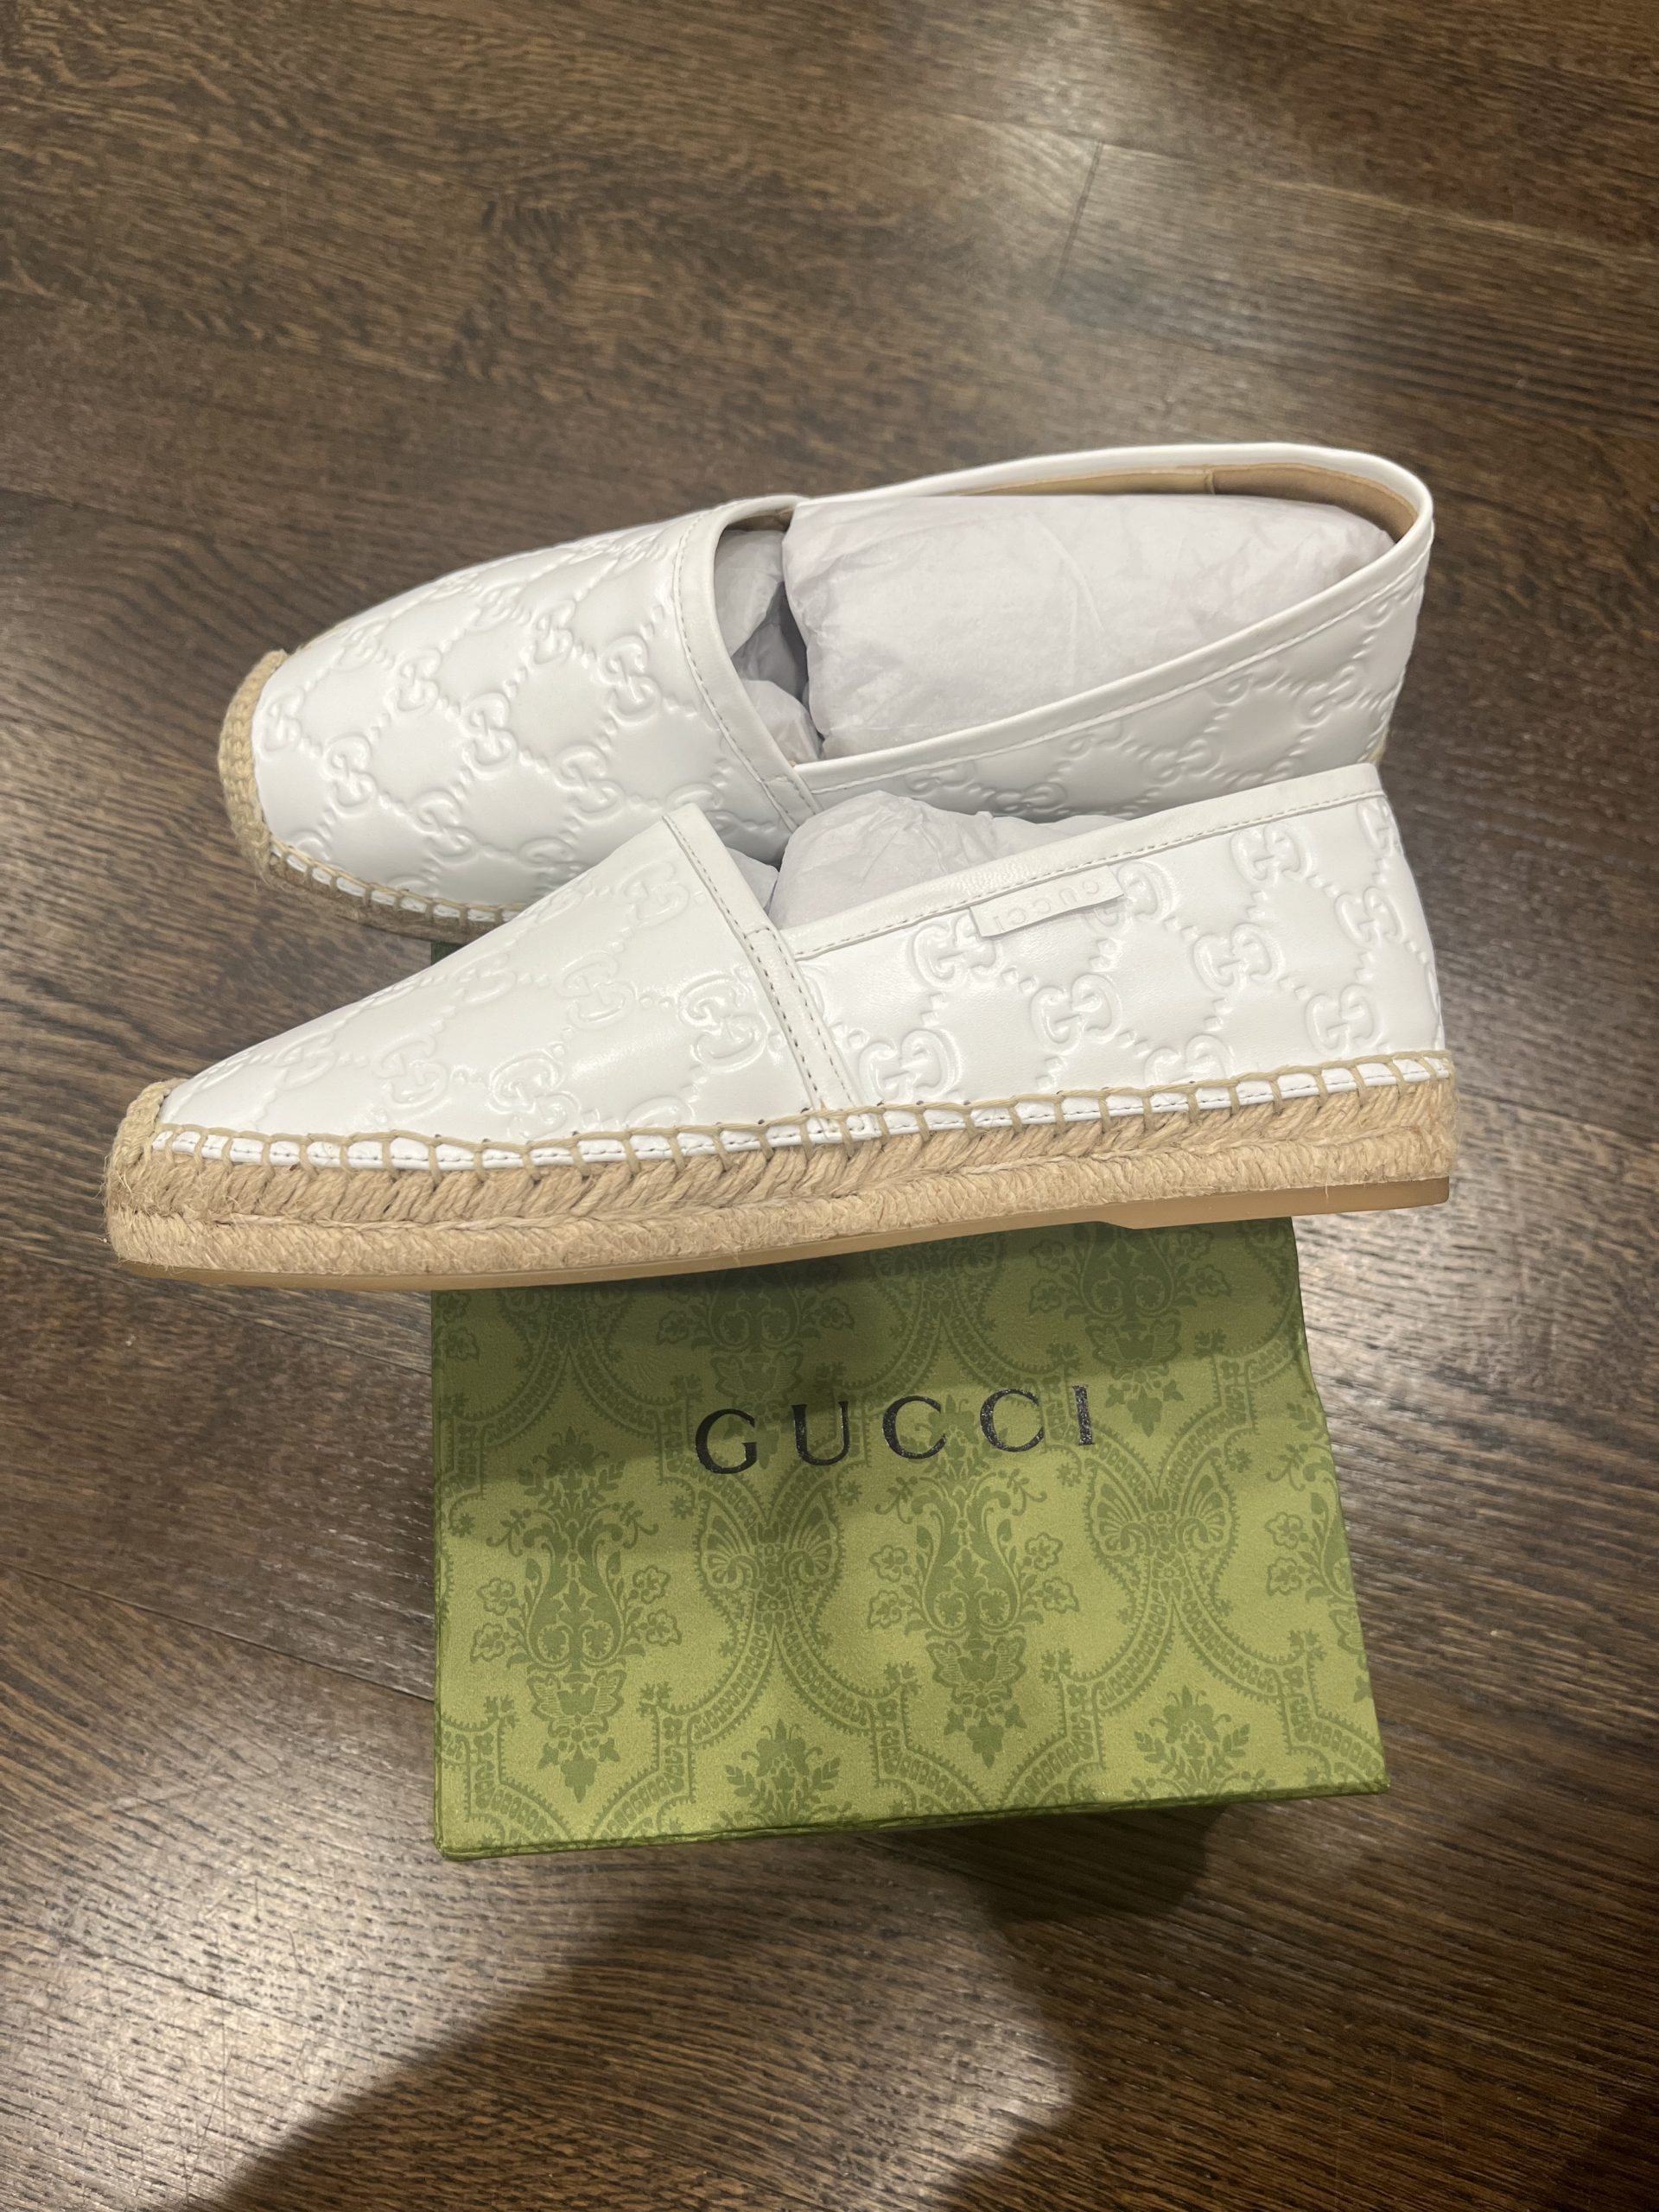 Gucci Inspired White Espadrilles